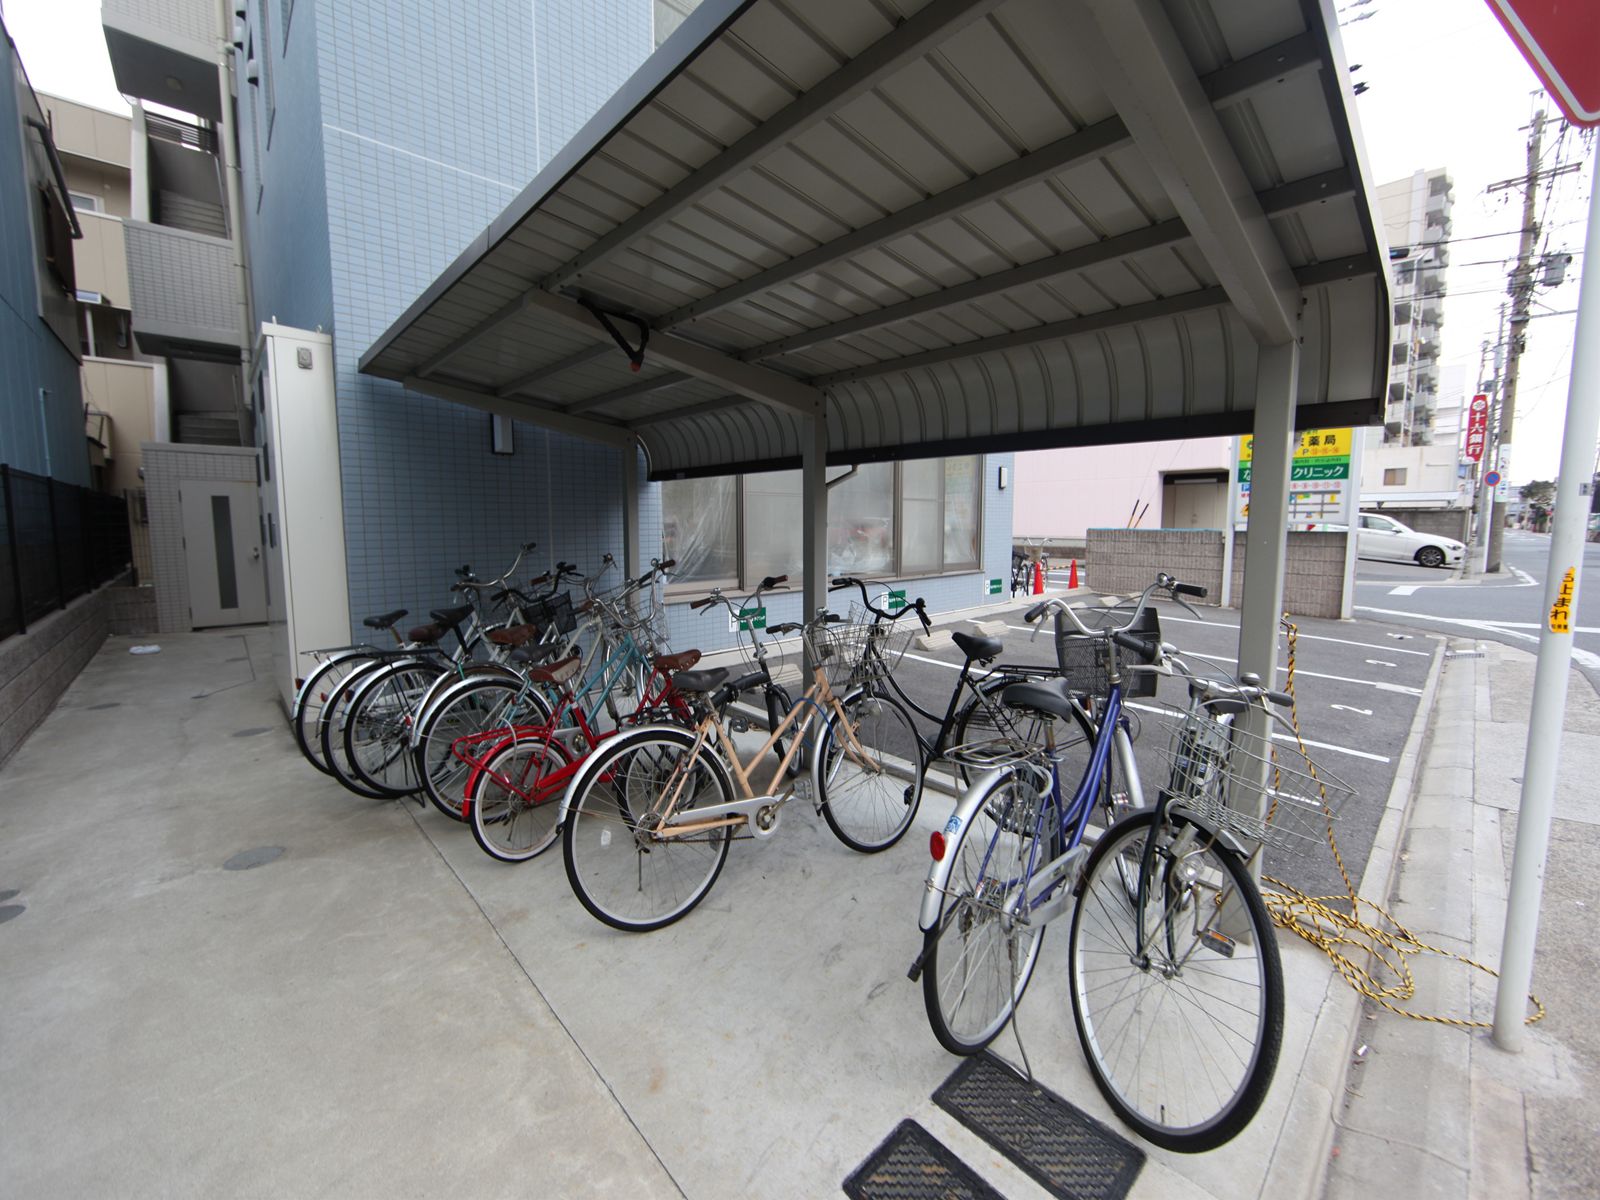 Other common areas. Bicycle parking lot equipped with roof